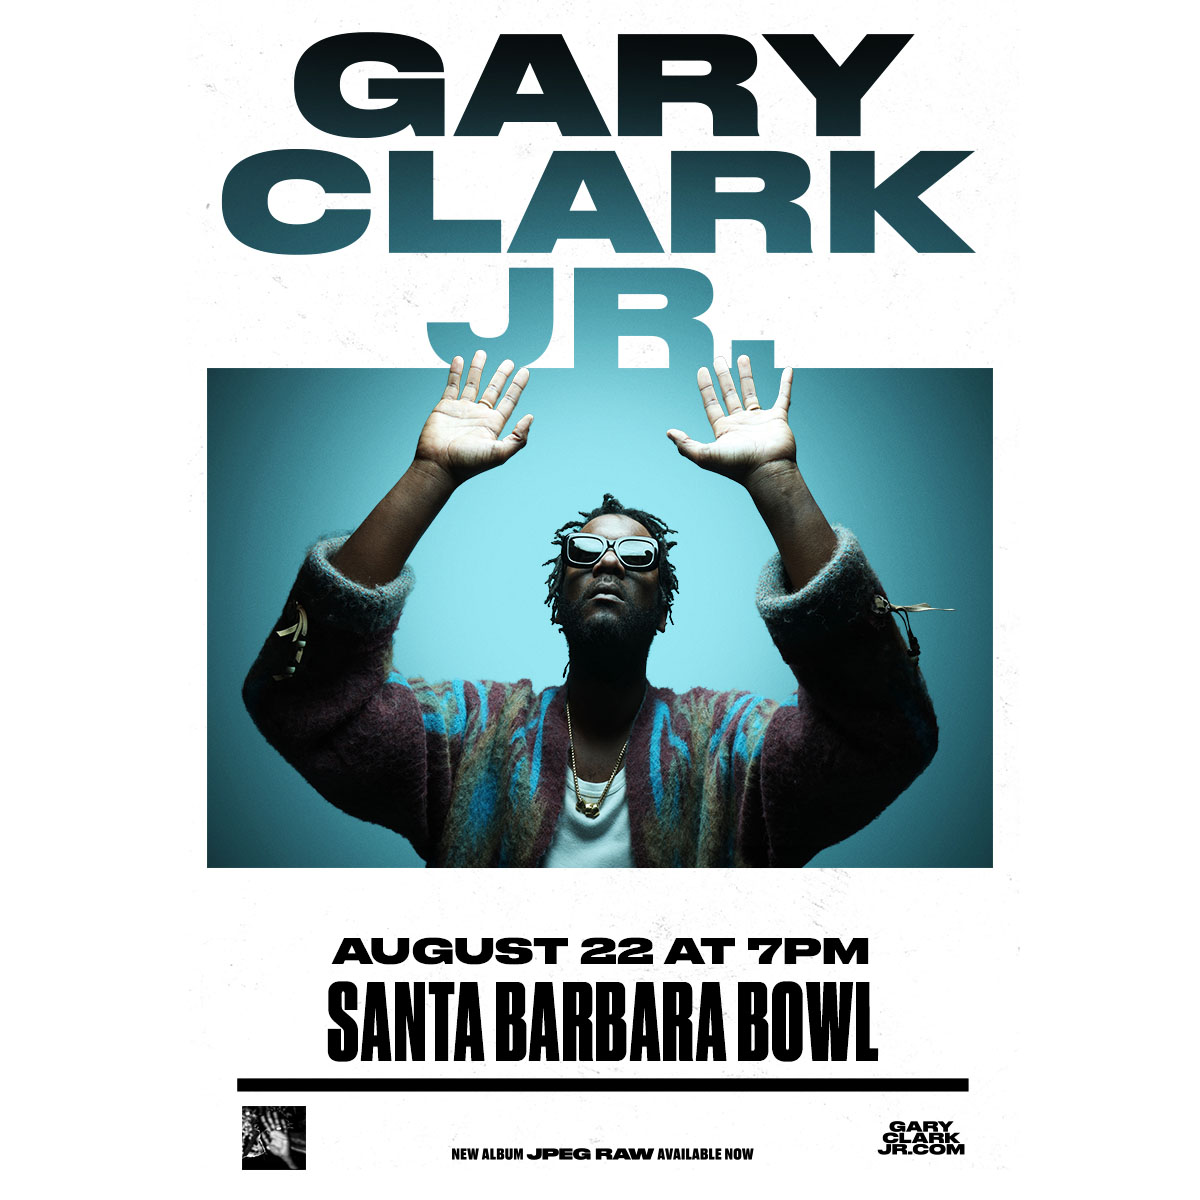 📣 @GaryClarkJr returns to the @SBBowl on 8/22! 🎟️ Tix on sale 3/28 @ 10 AM 🎟️ Purchase your tickets at the Bowl Box Office or online: sbbowl.com 🎶For all Bowl news & info: sbbowl.com #SantaBarbaraBowl #SBBowl #SBBowlSeason2024 #GaryClarkJr